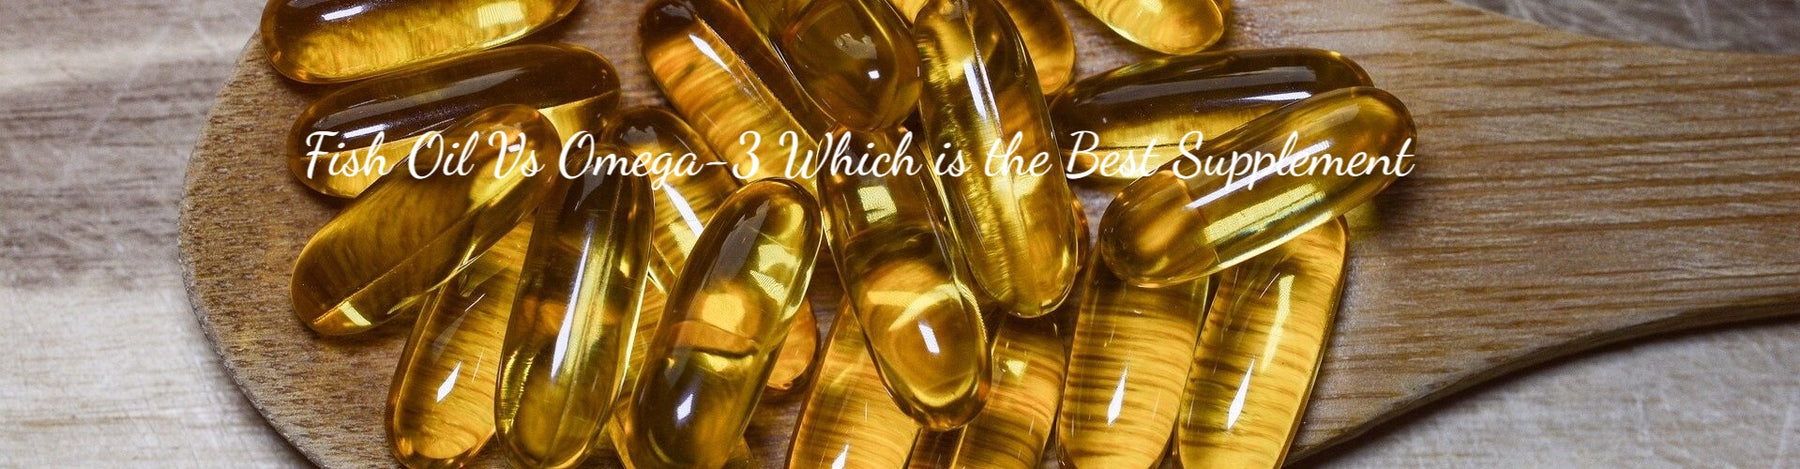 Fish Oil Vs Omega-3: Which is the Best Supplement?